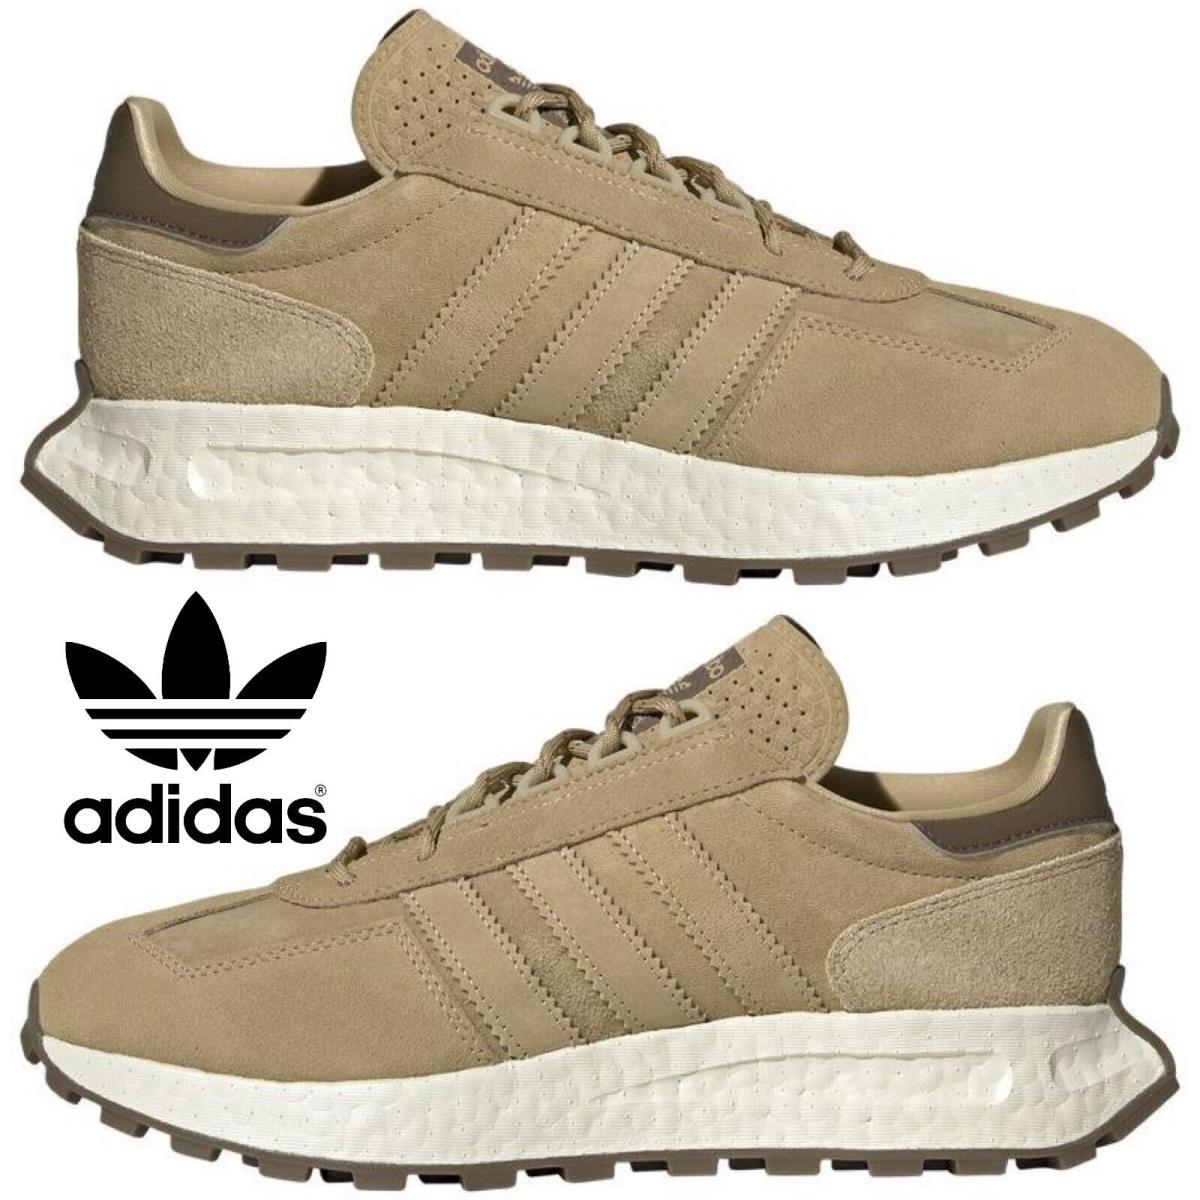 Adidas Retropy E5 Men`s Sneakers Running Shoes Gym Casual Sport Beige Brown